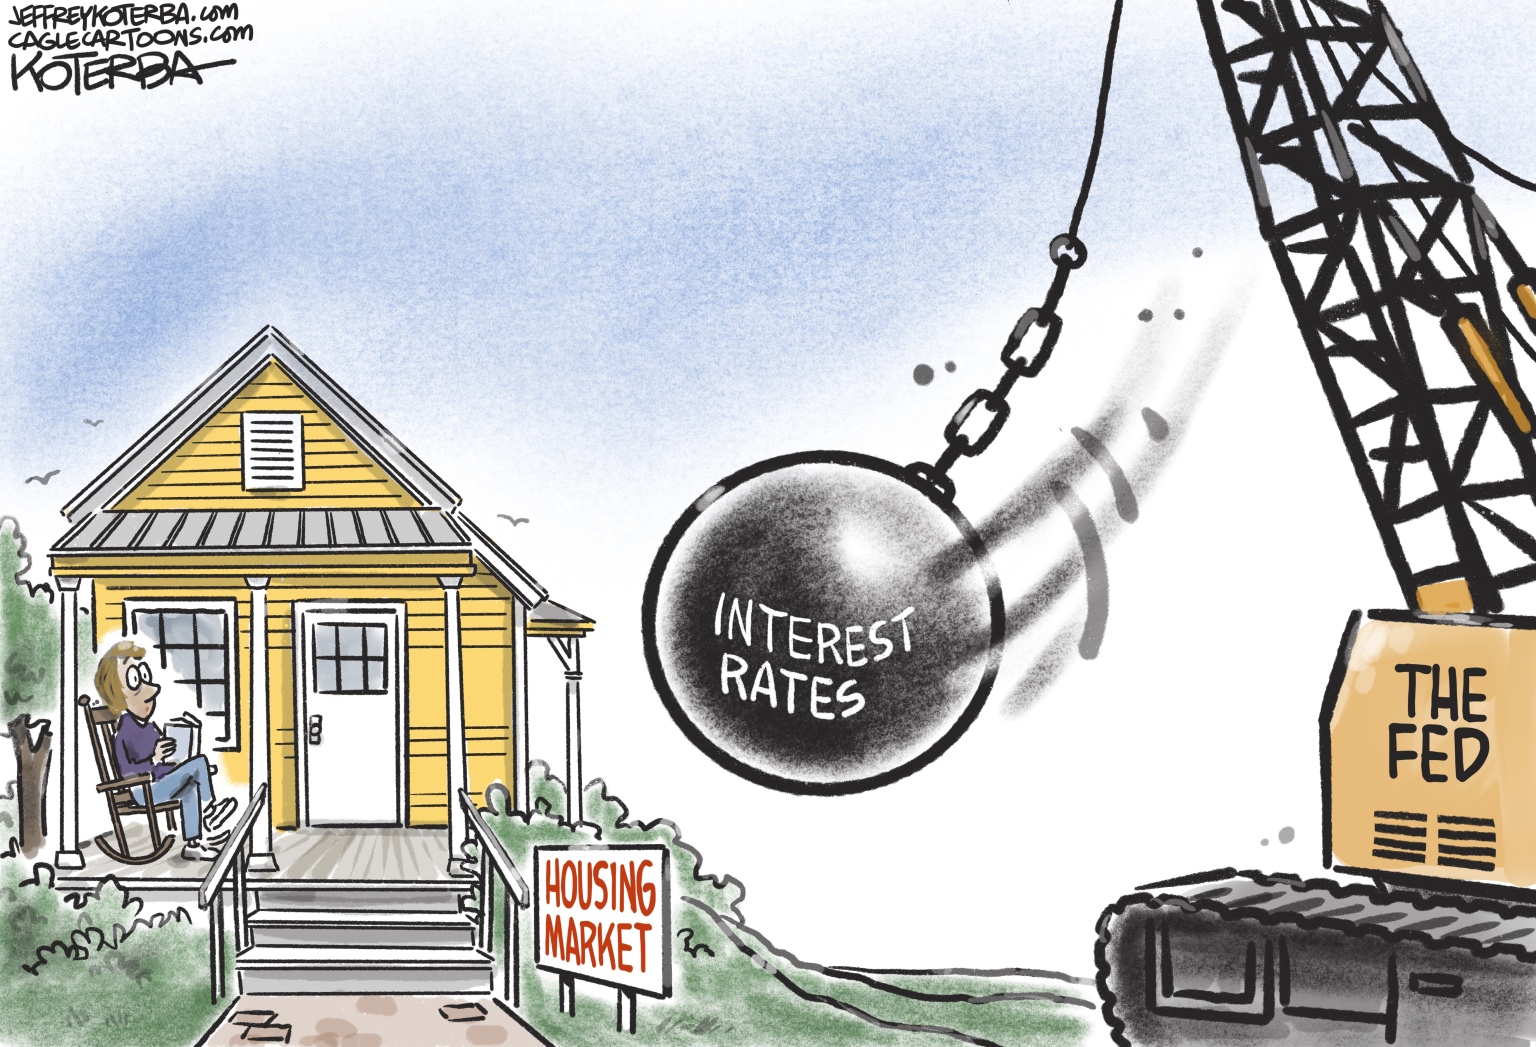 Editorial Cartoon: Fed to Crash Housing Market? - The Independent | News Events Opinion More